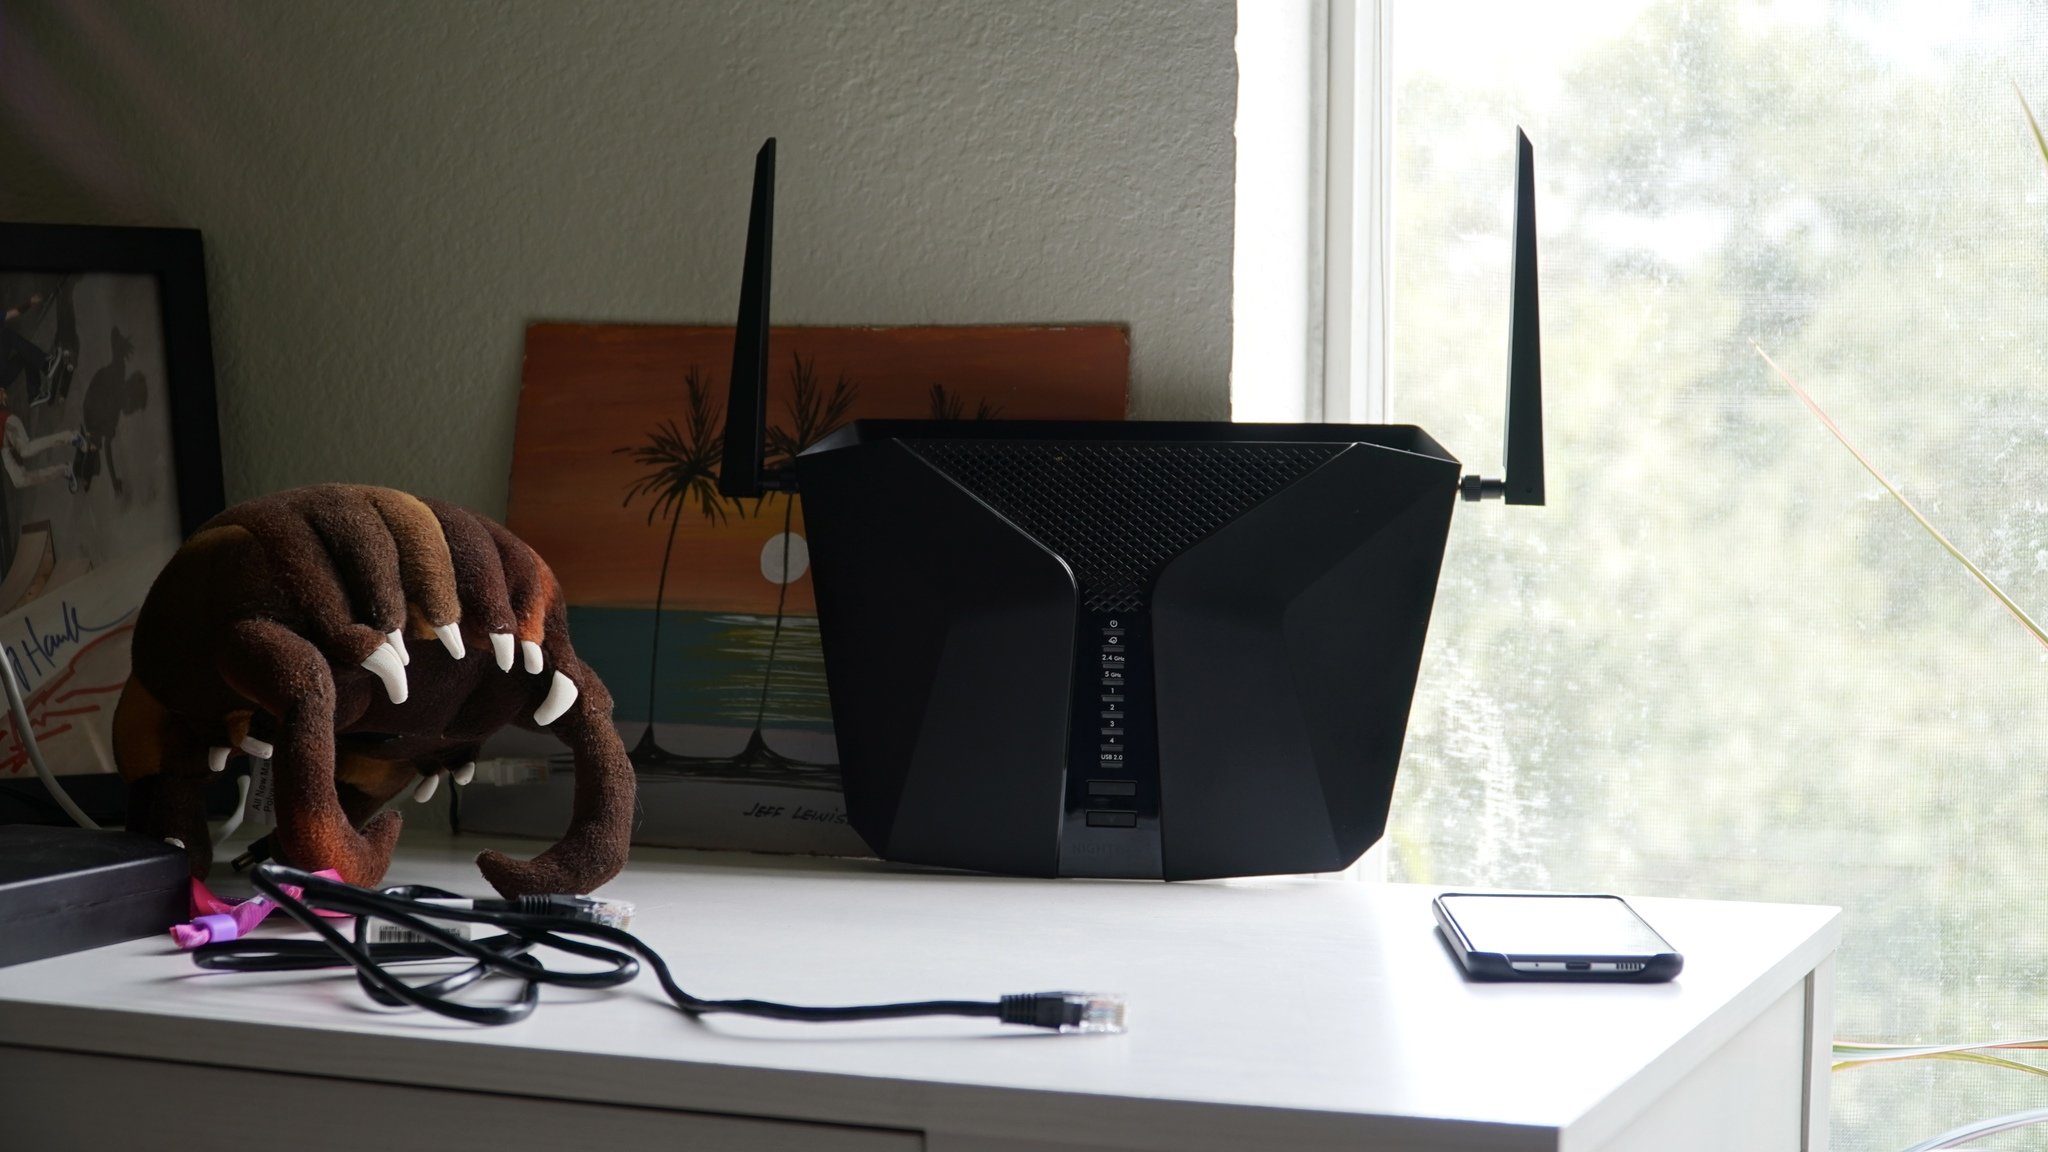 Should you wall-mount your Wi-Fi router? | Central